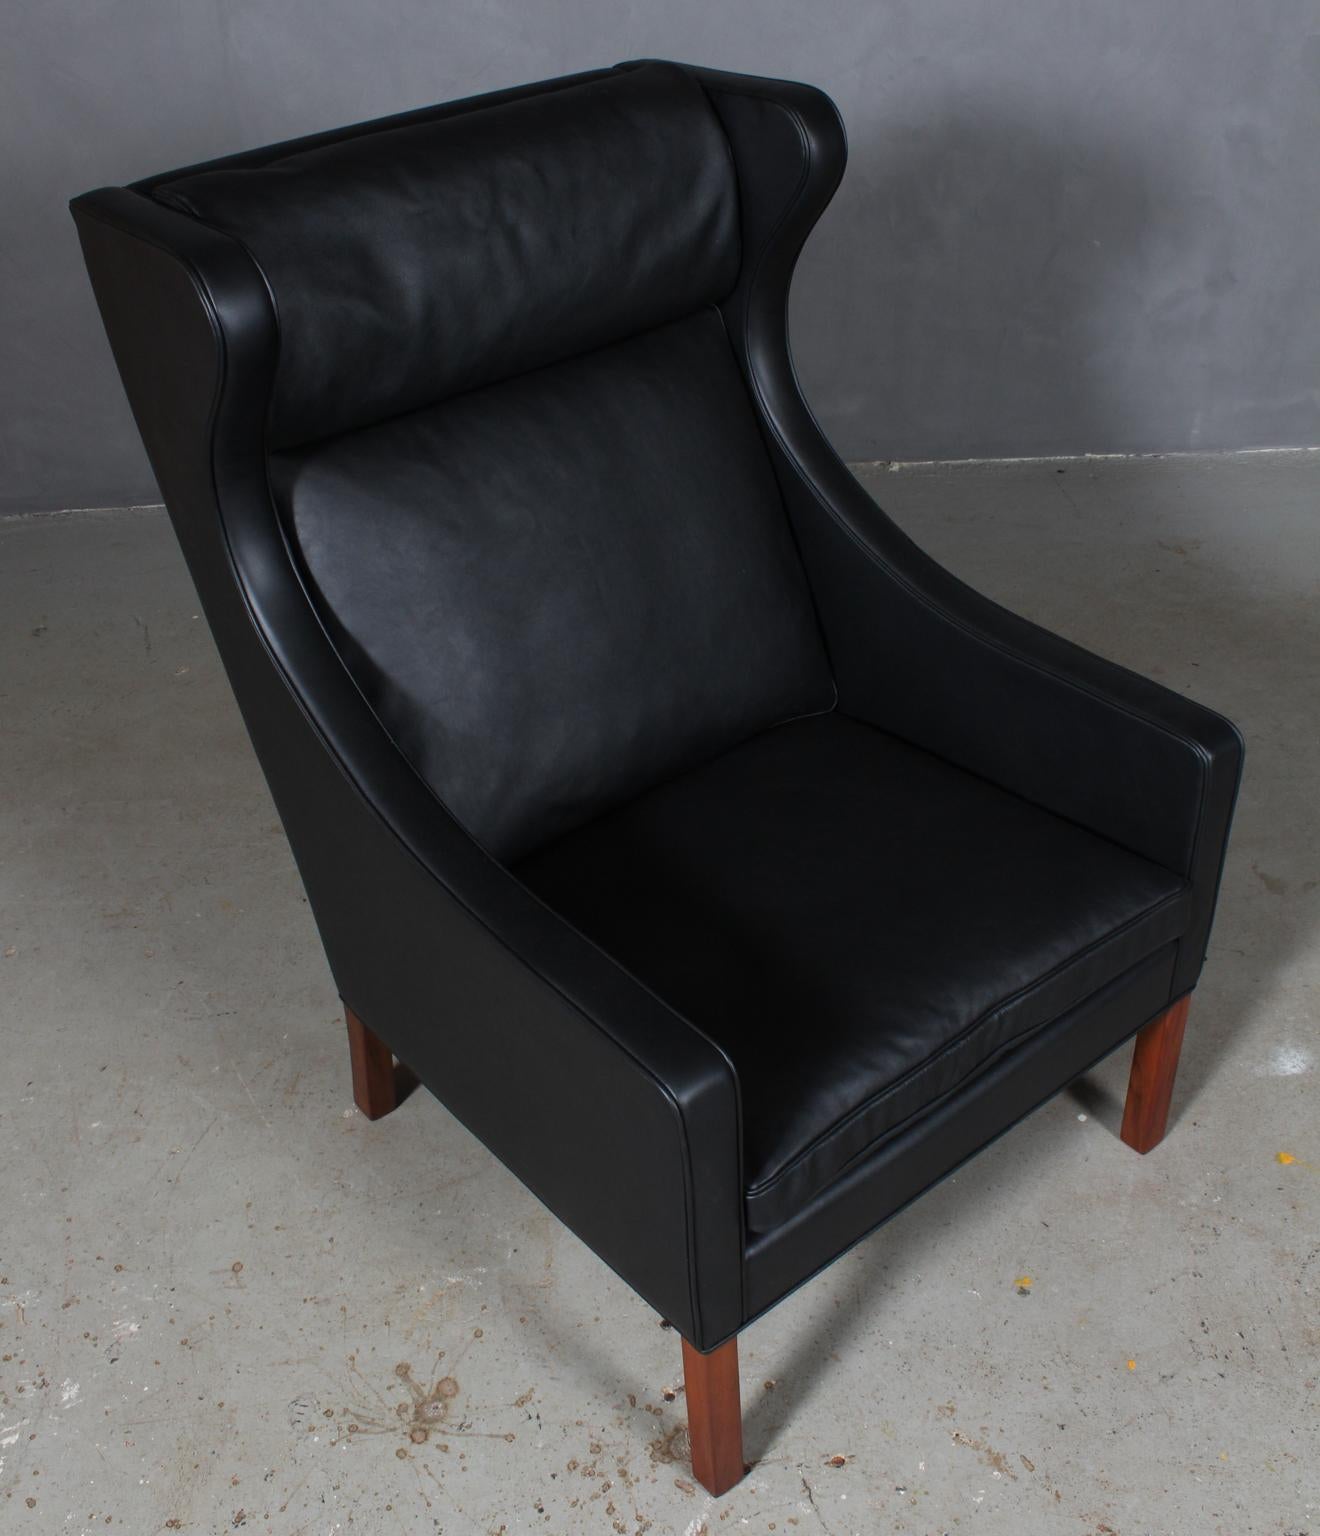 Børge Mogensen wingback chair new upholstered with black elegance leather.

Legs in teak.

Model 2204, made by Fredericia Furniture.